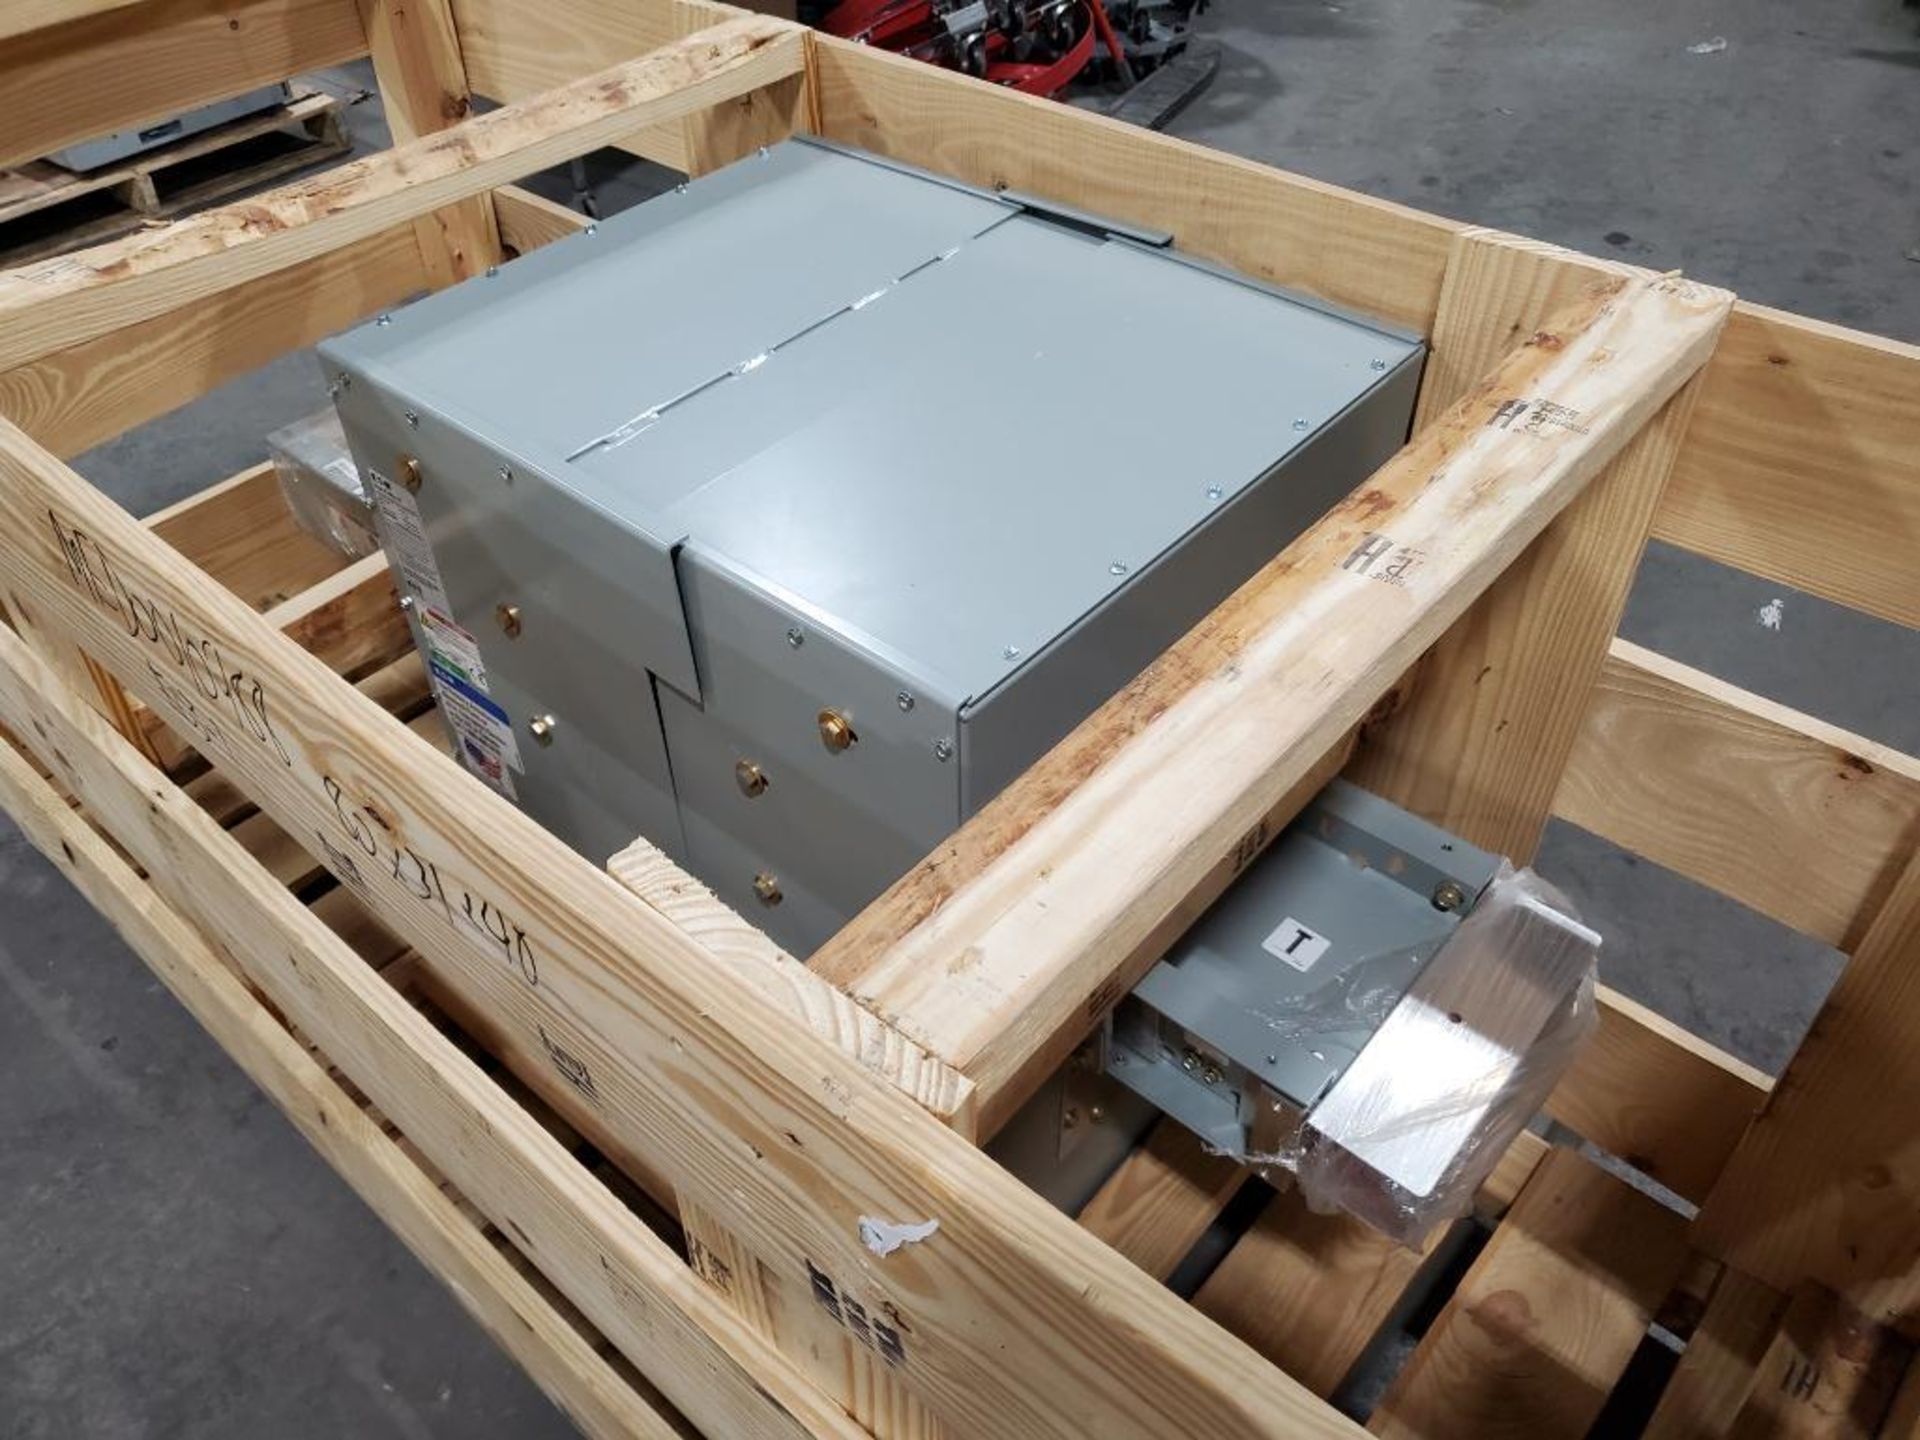 2000amp Eaton Pow-R-Way III bus tap box. 3 wire, 480v. MED0010988. New in crate. - Image 2 of 6